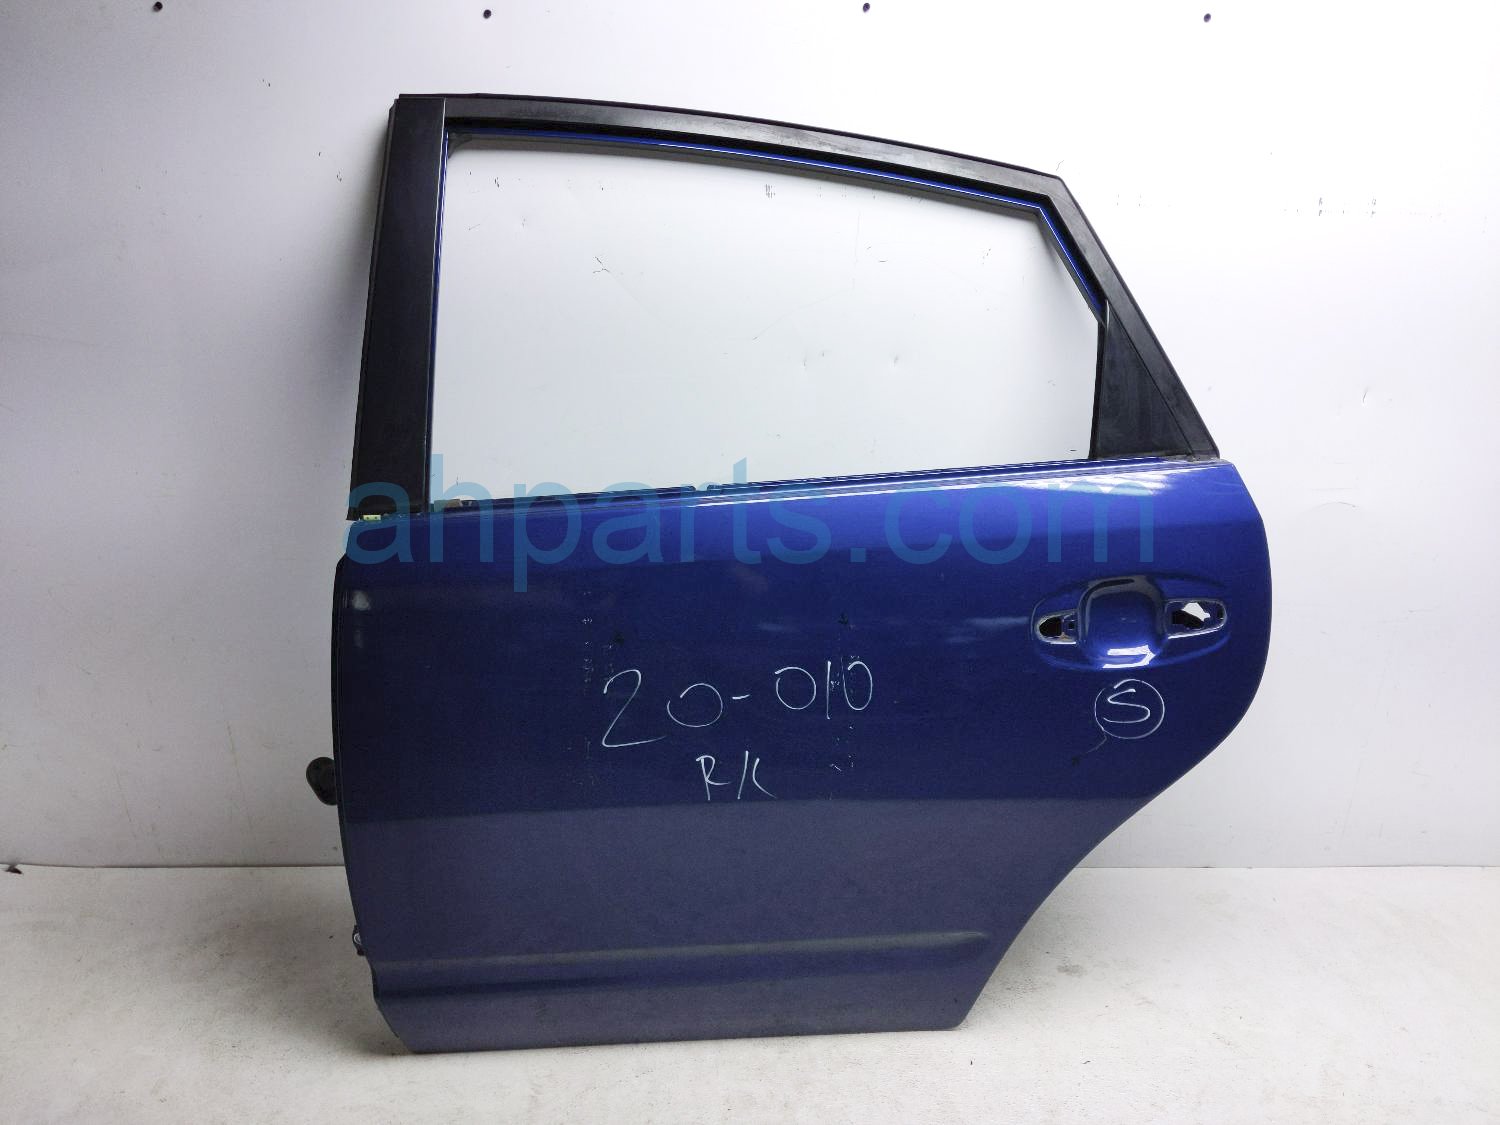 $195 Toyota RR/LH DOOR - BLUE - SHELL ONLY